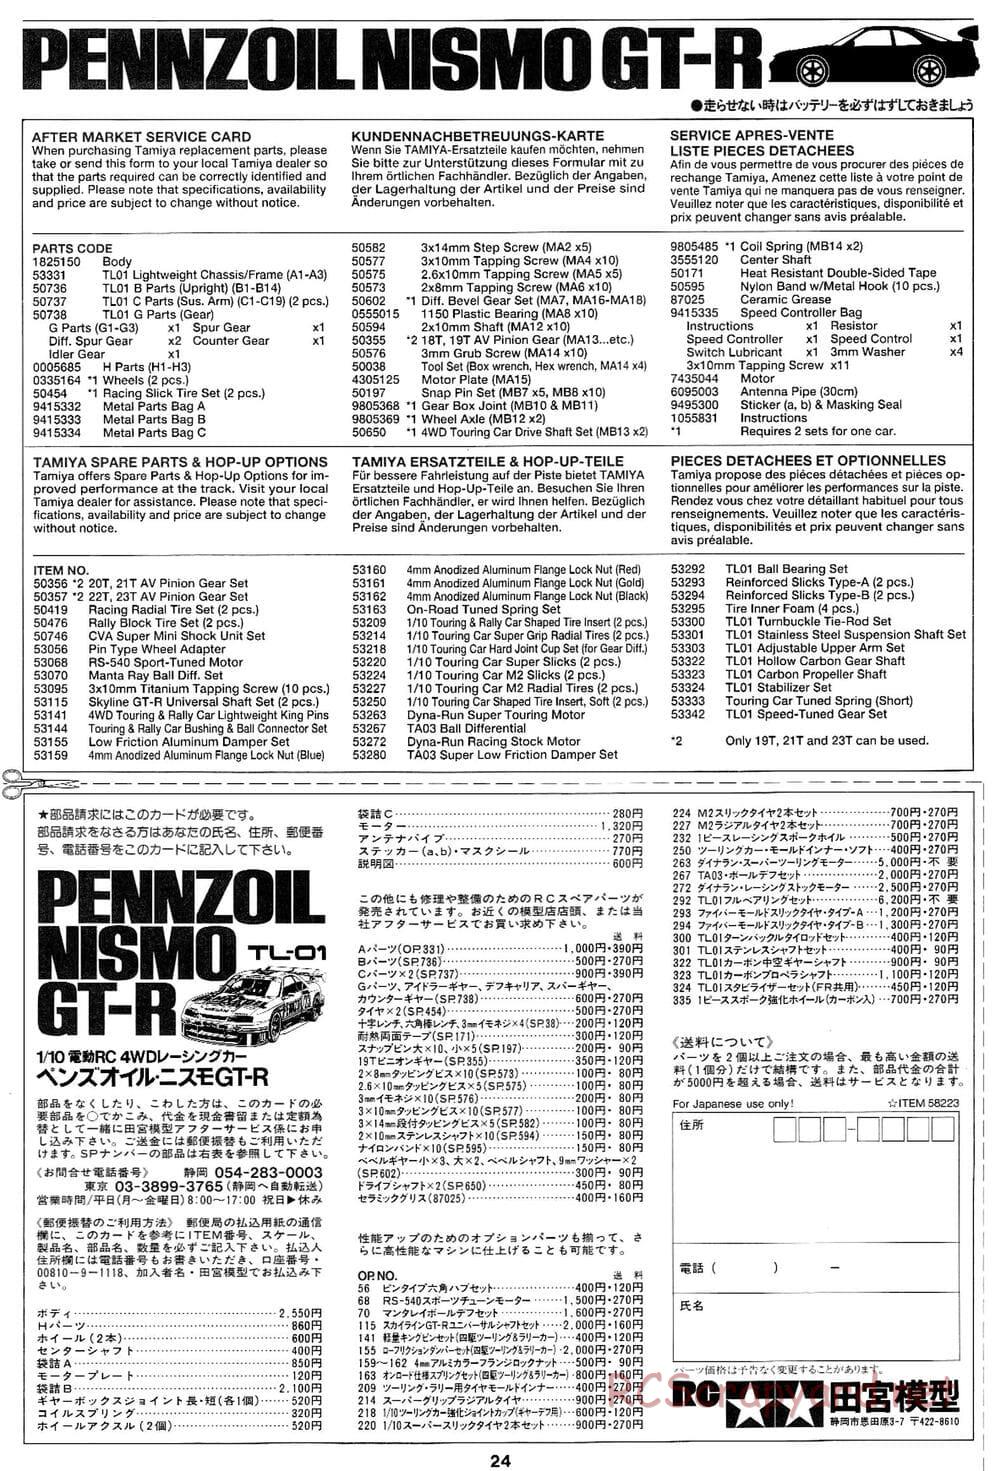 Tamiya - Pennzoil Nismo GT-R - TL-01 Chassis - Manual - Page 24